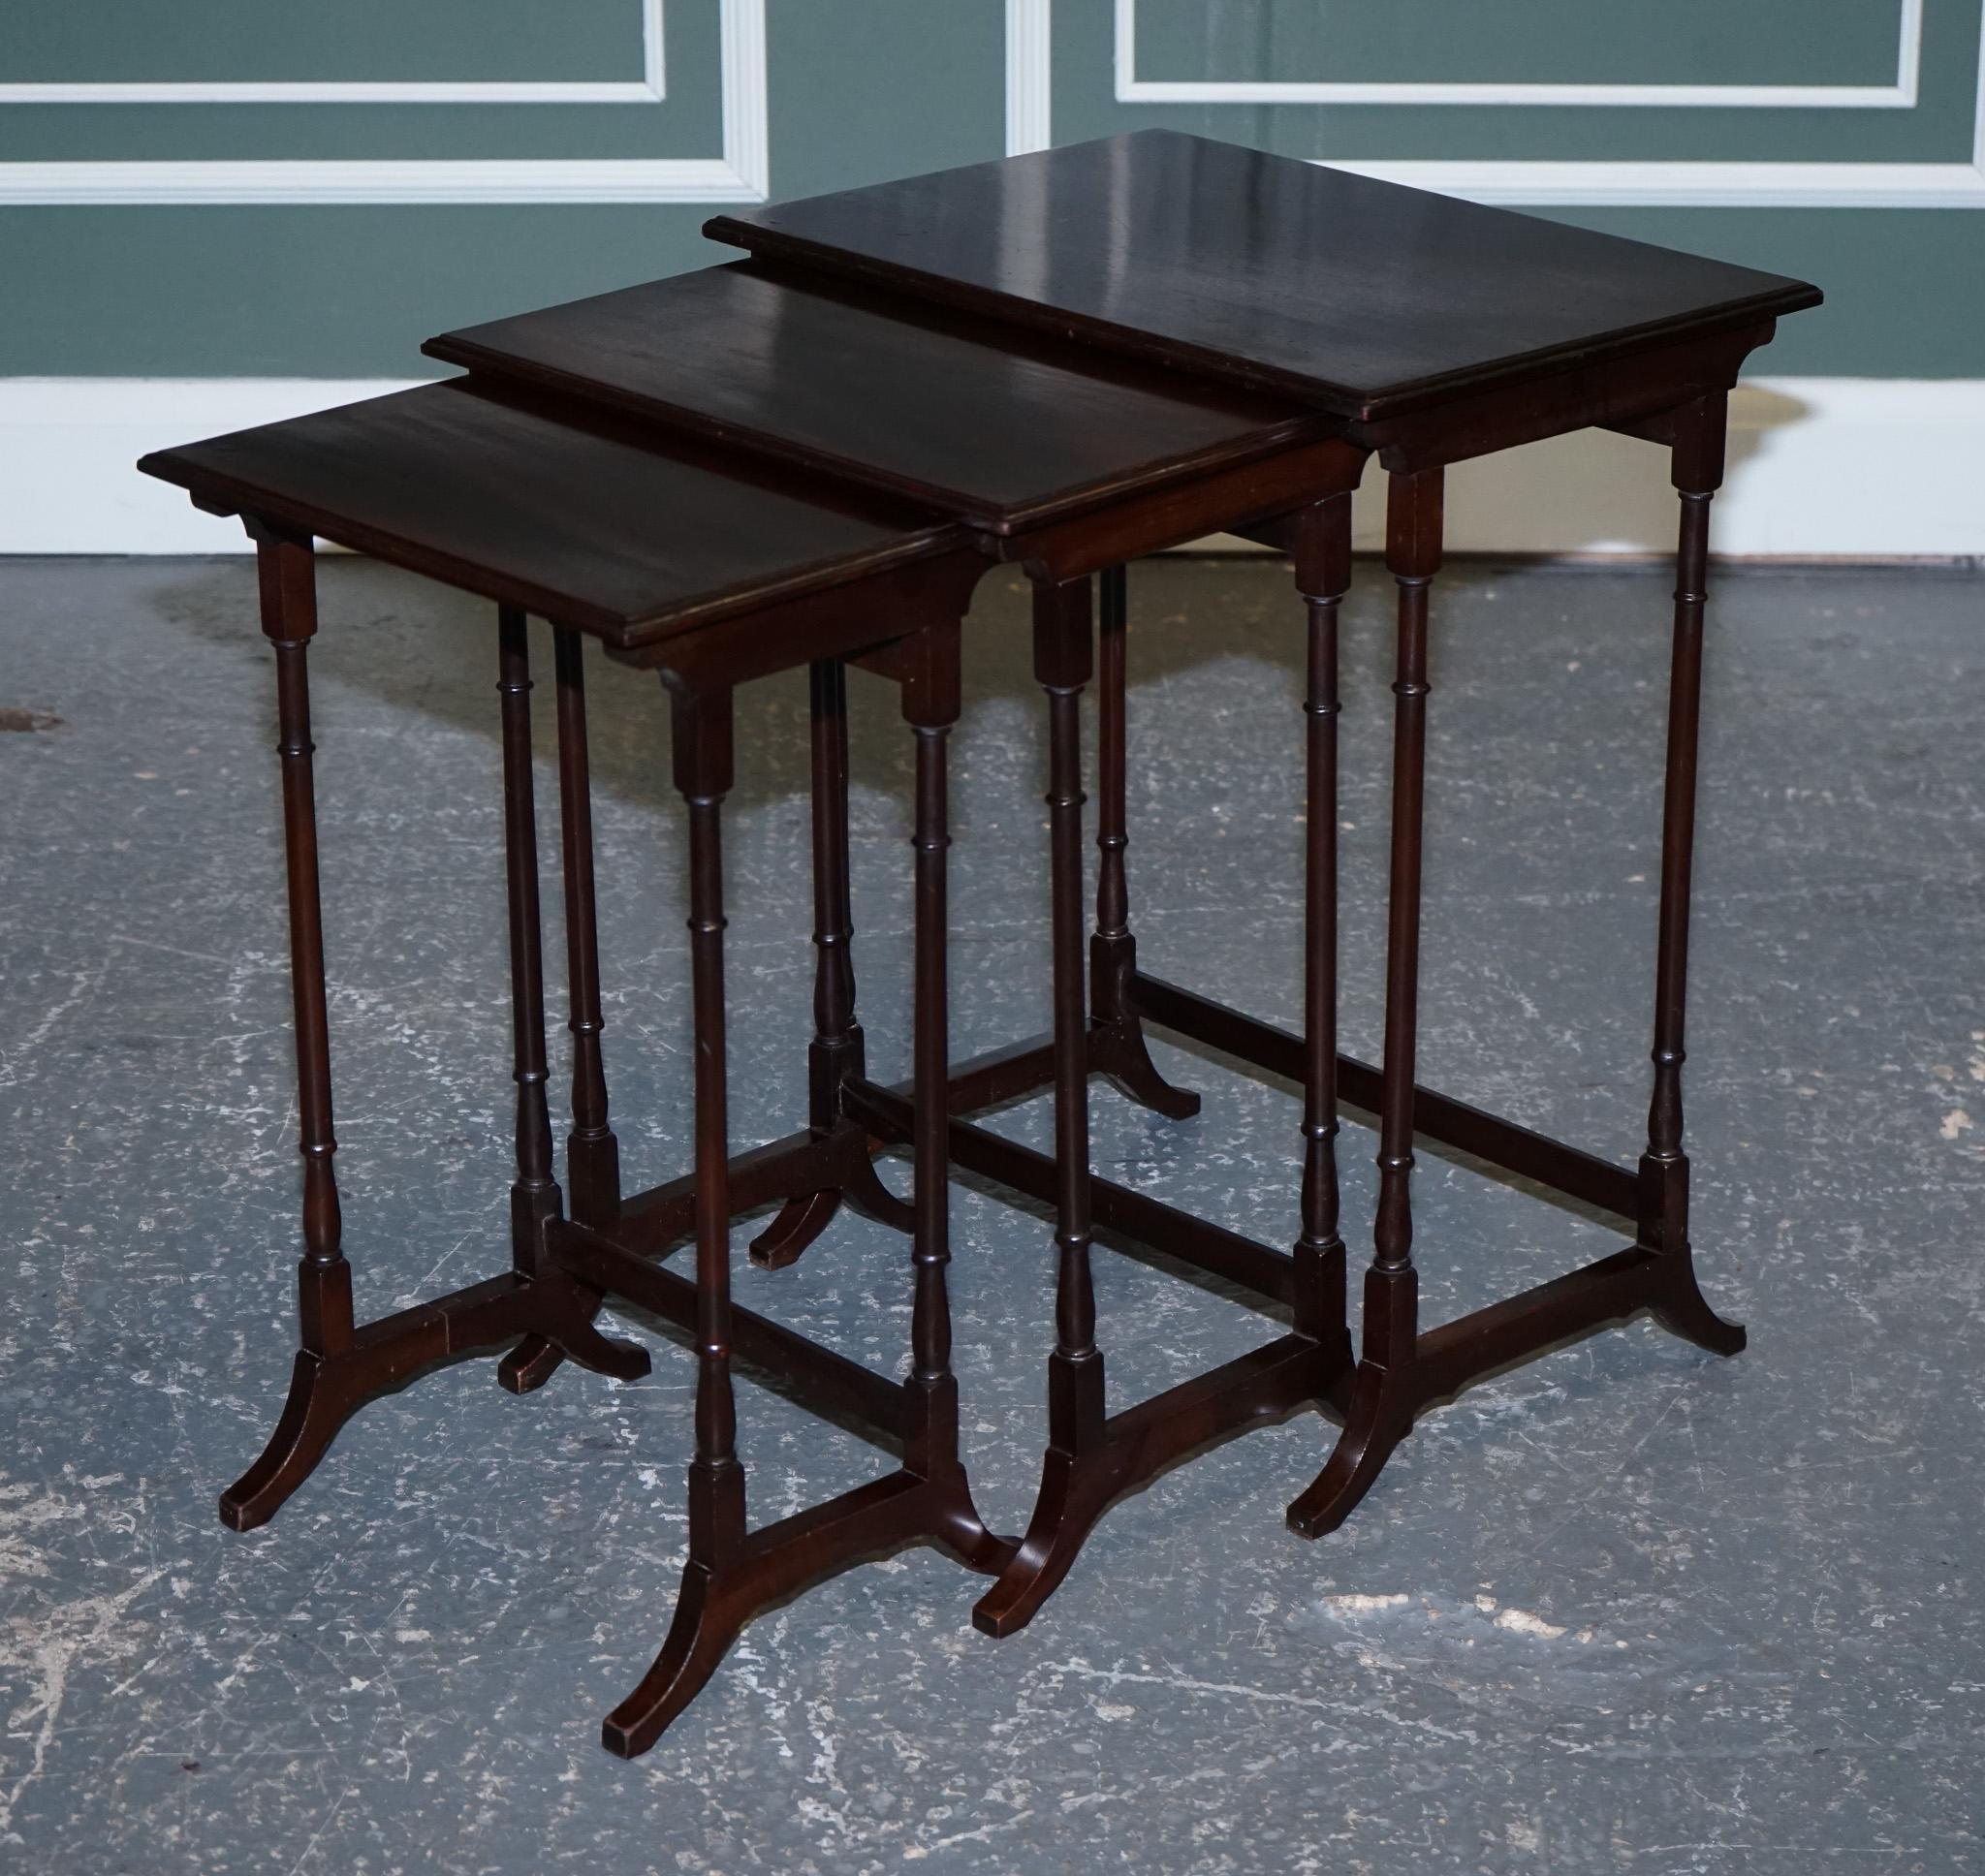 British Antique Victorian Nest of Three Nesting Tables Side Tables with Bamboo Legs  For Sale